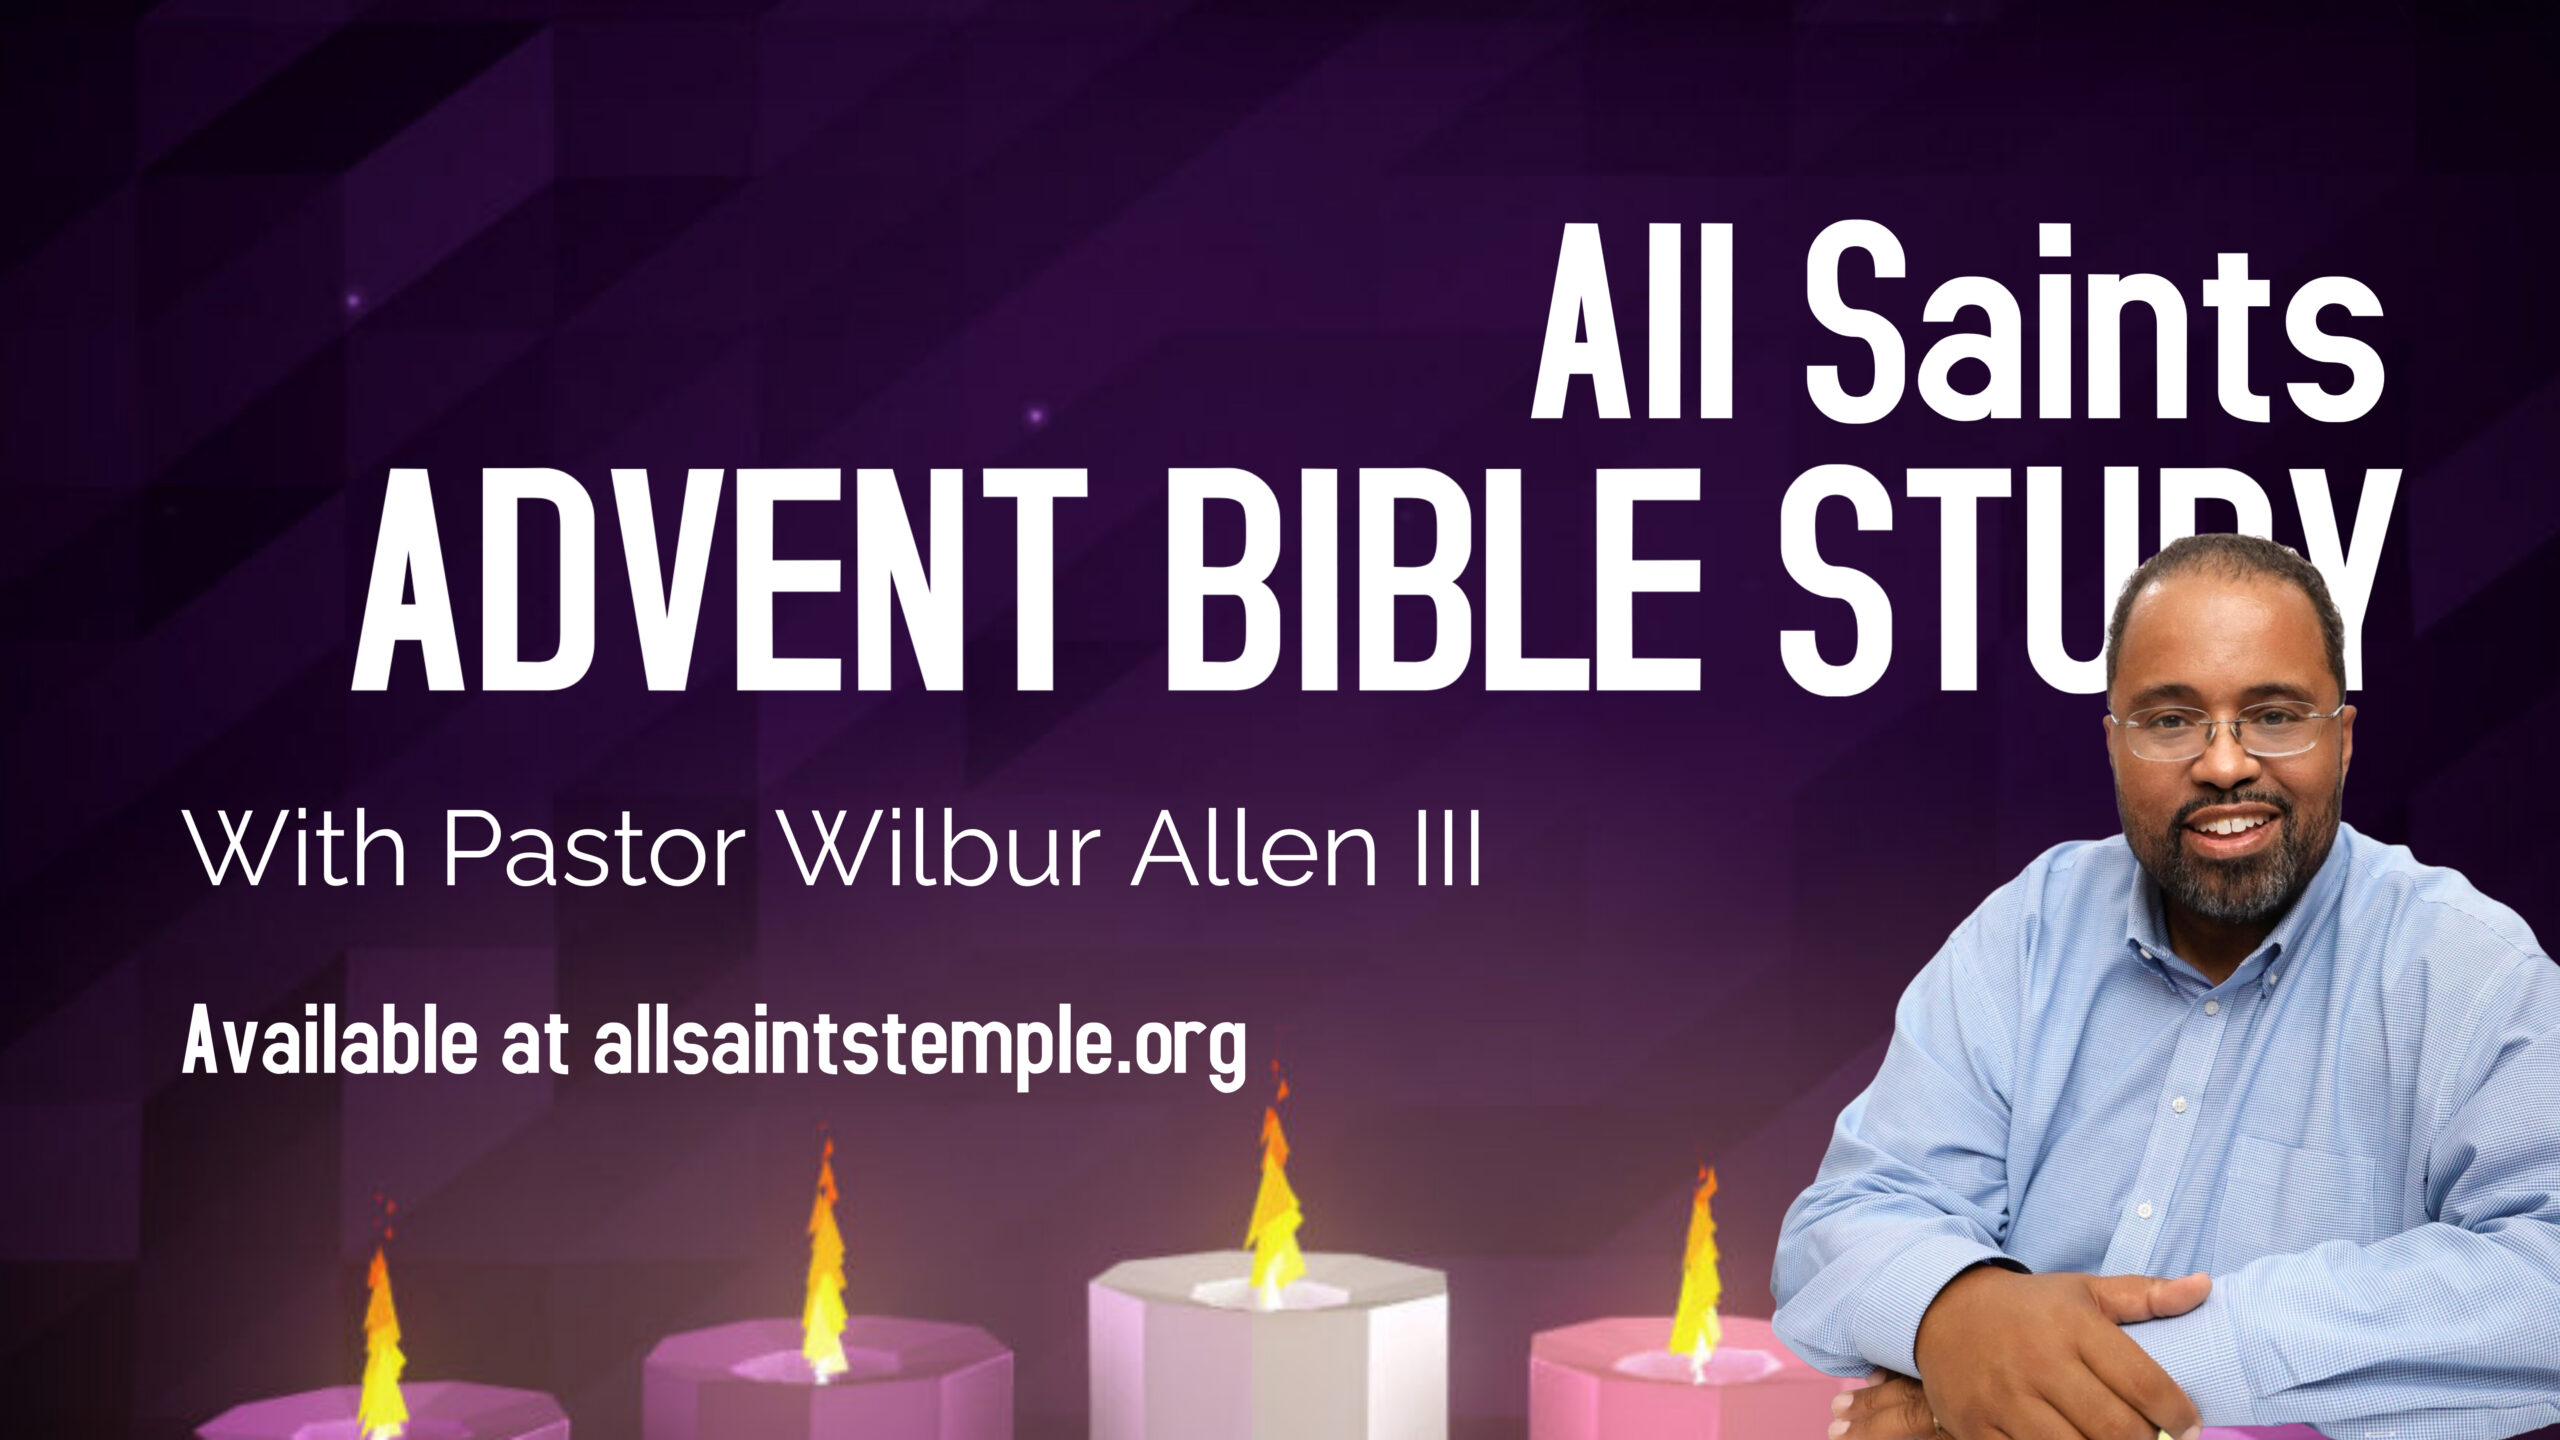 All Saints Bible Study - A Special Advent Bible Study